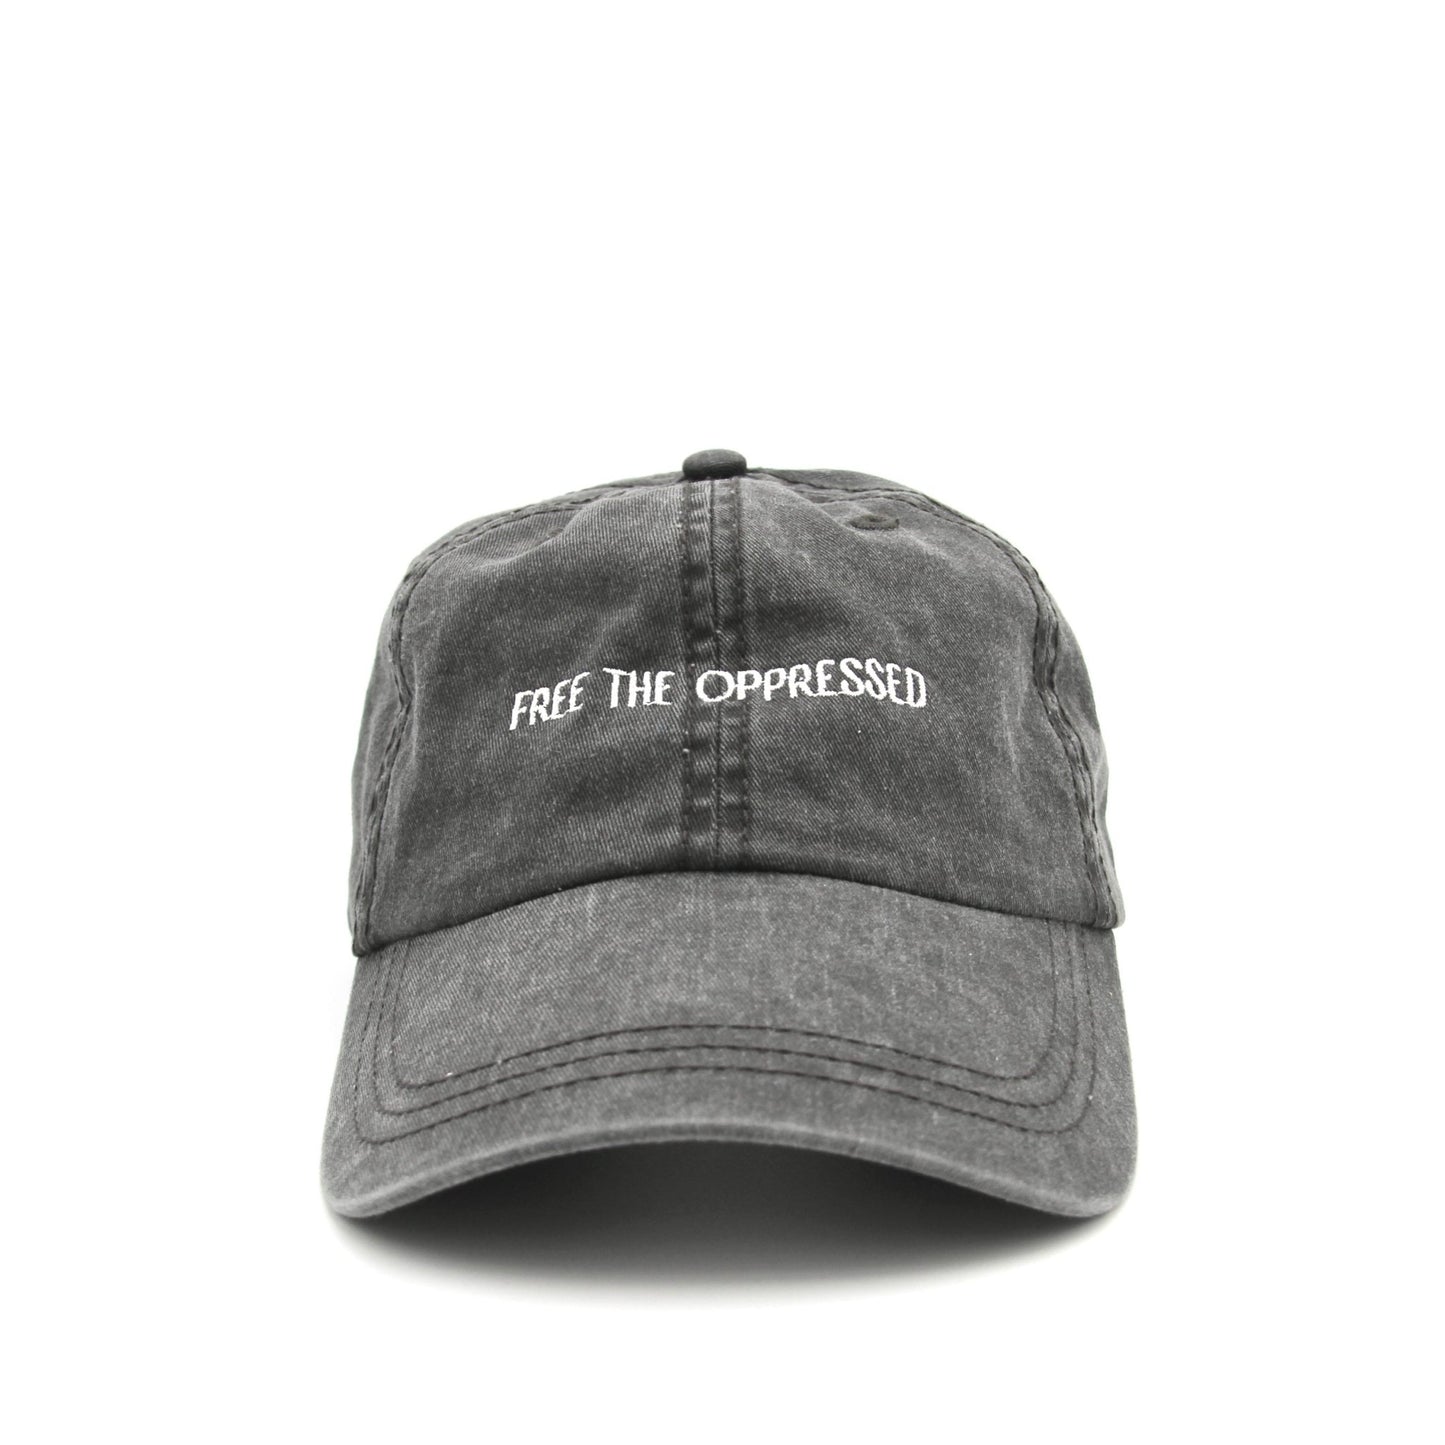 Free The Oppressed Cap Wear The Peace Dad Caps